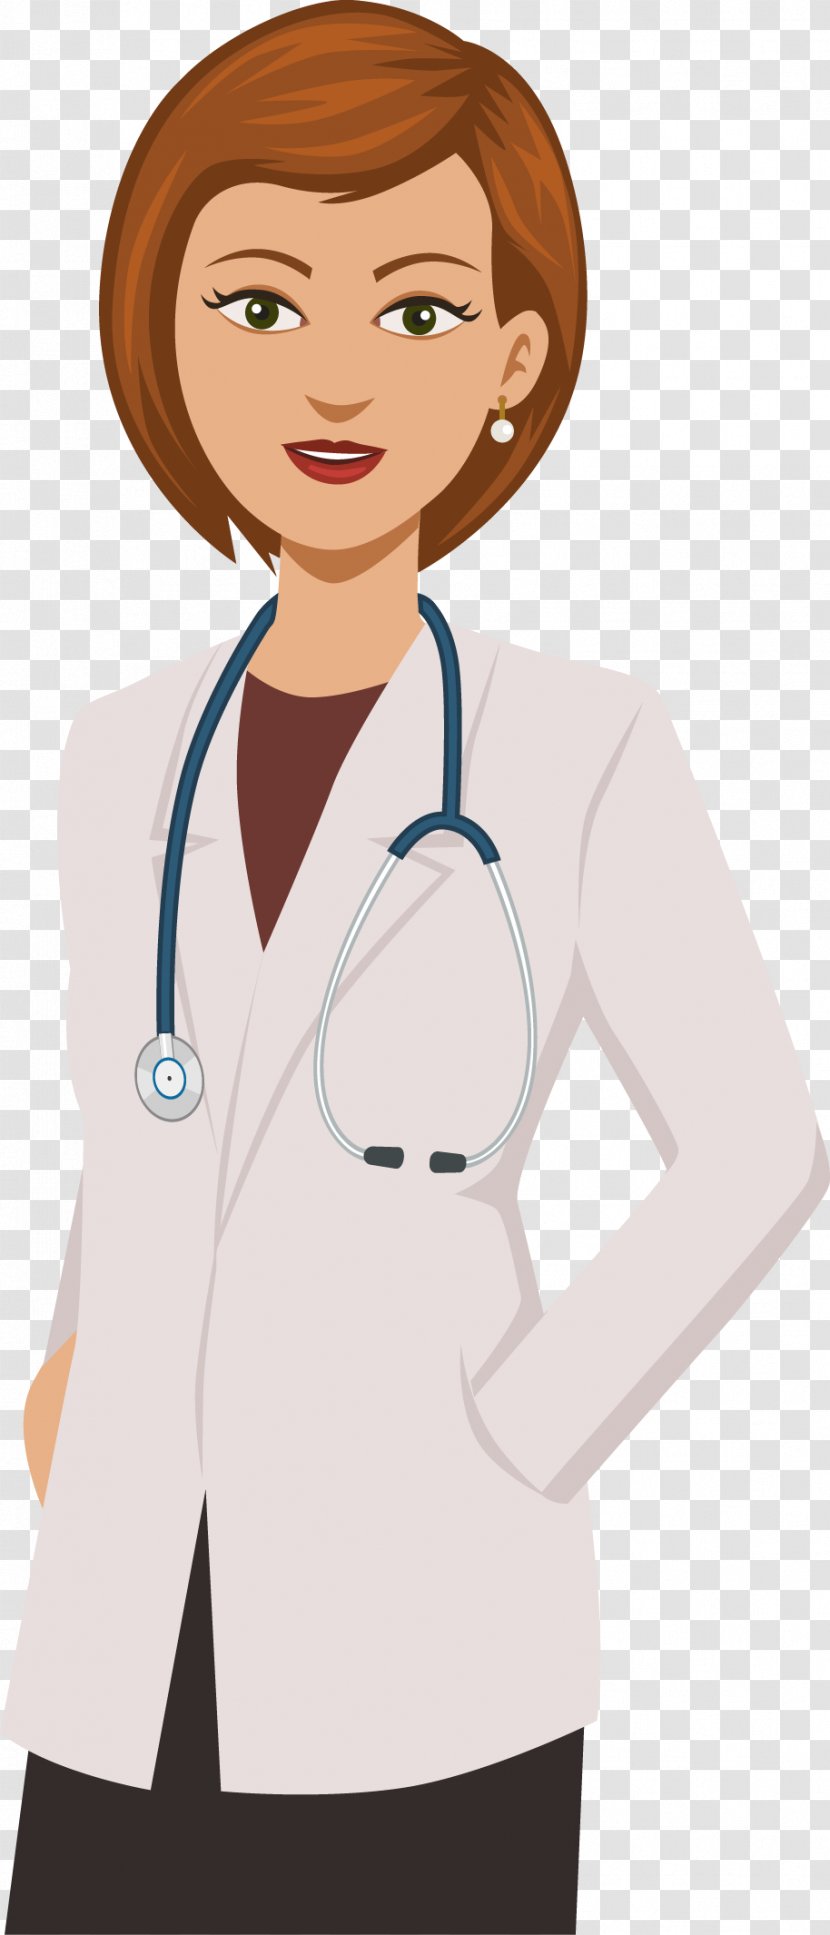 Cartoon Network Physician Adventure Time - Flower - Female Doctor Transparent PNG